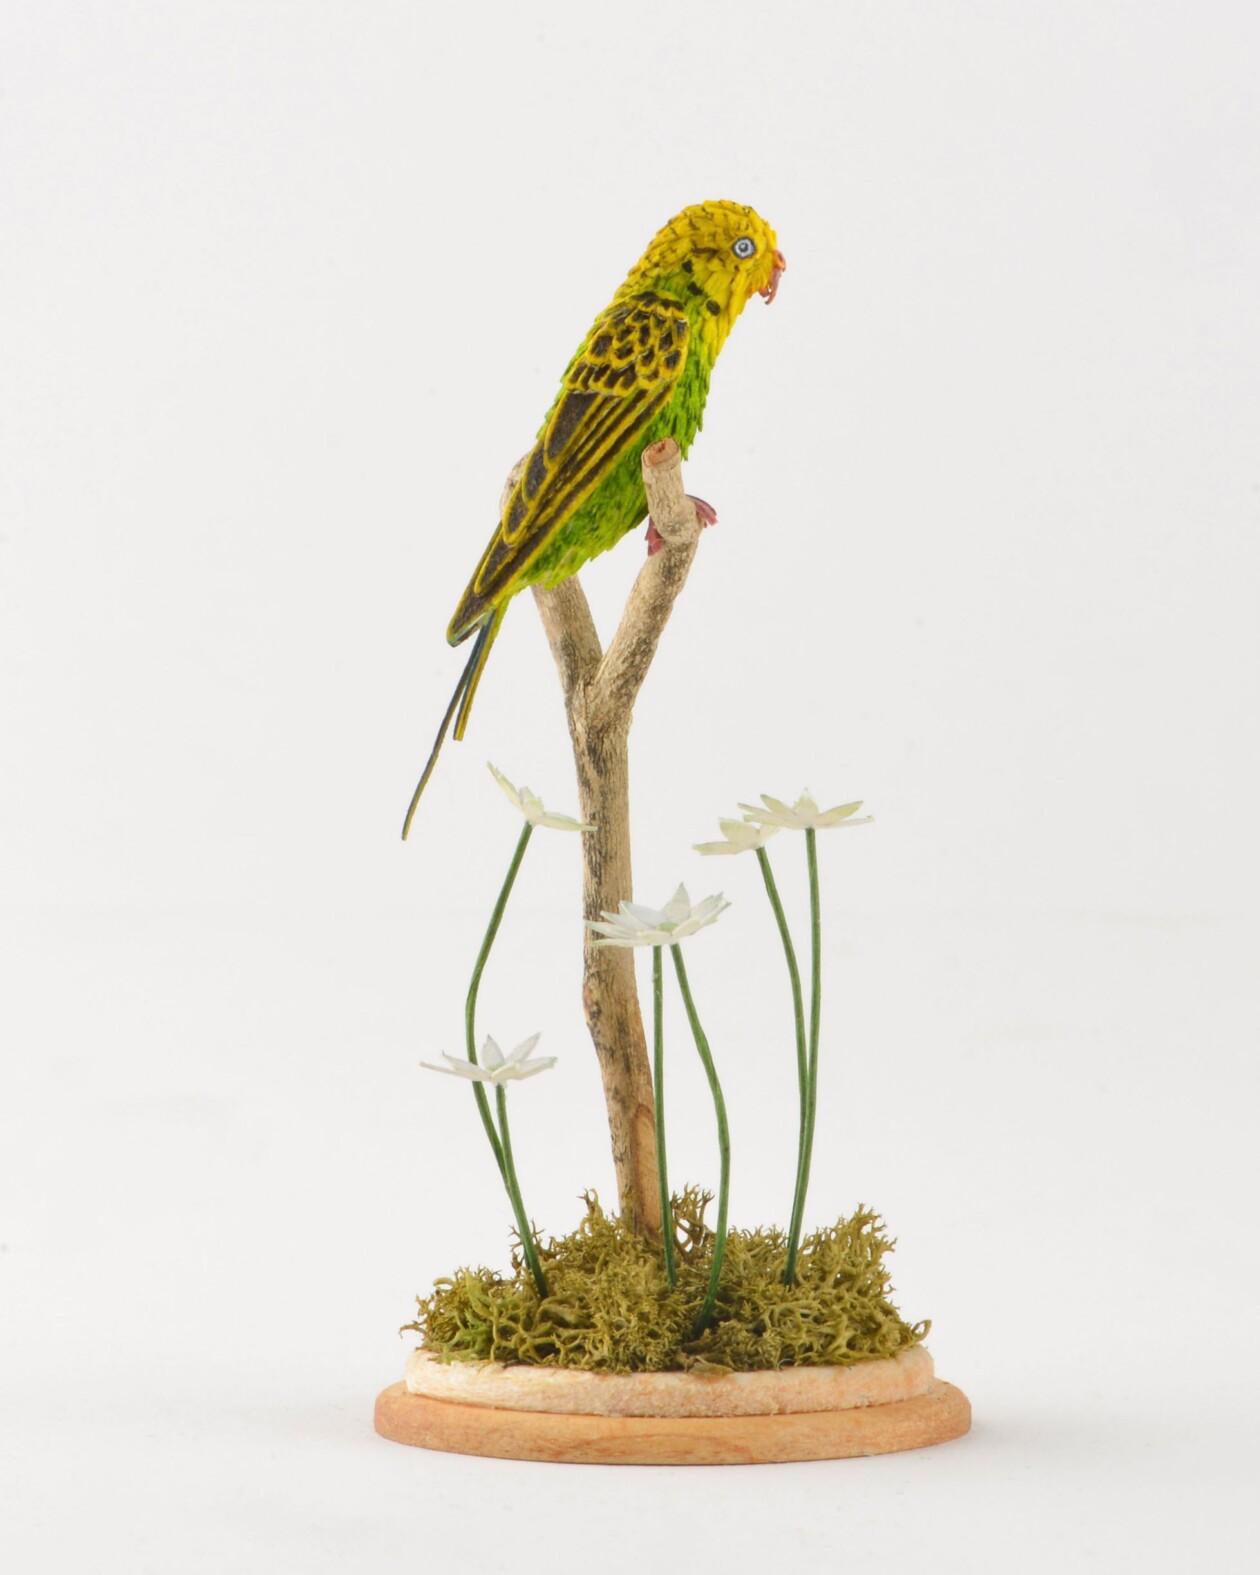 Miniature Bird Paper Sculptures With Whimsical Details By Nayan And Venus (9)